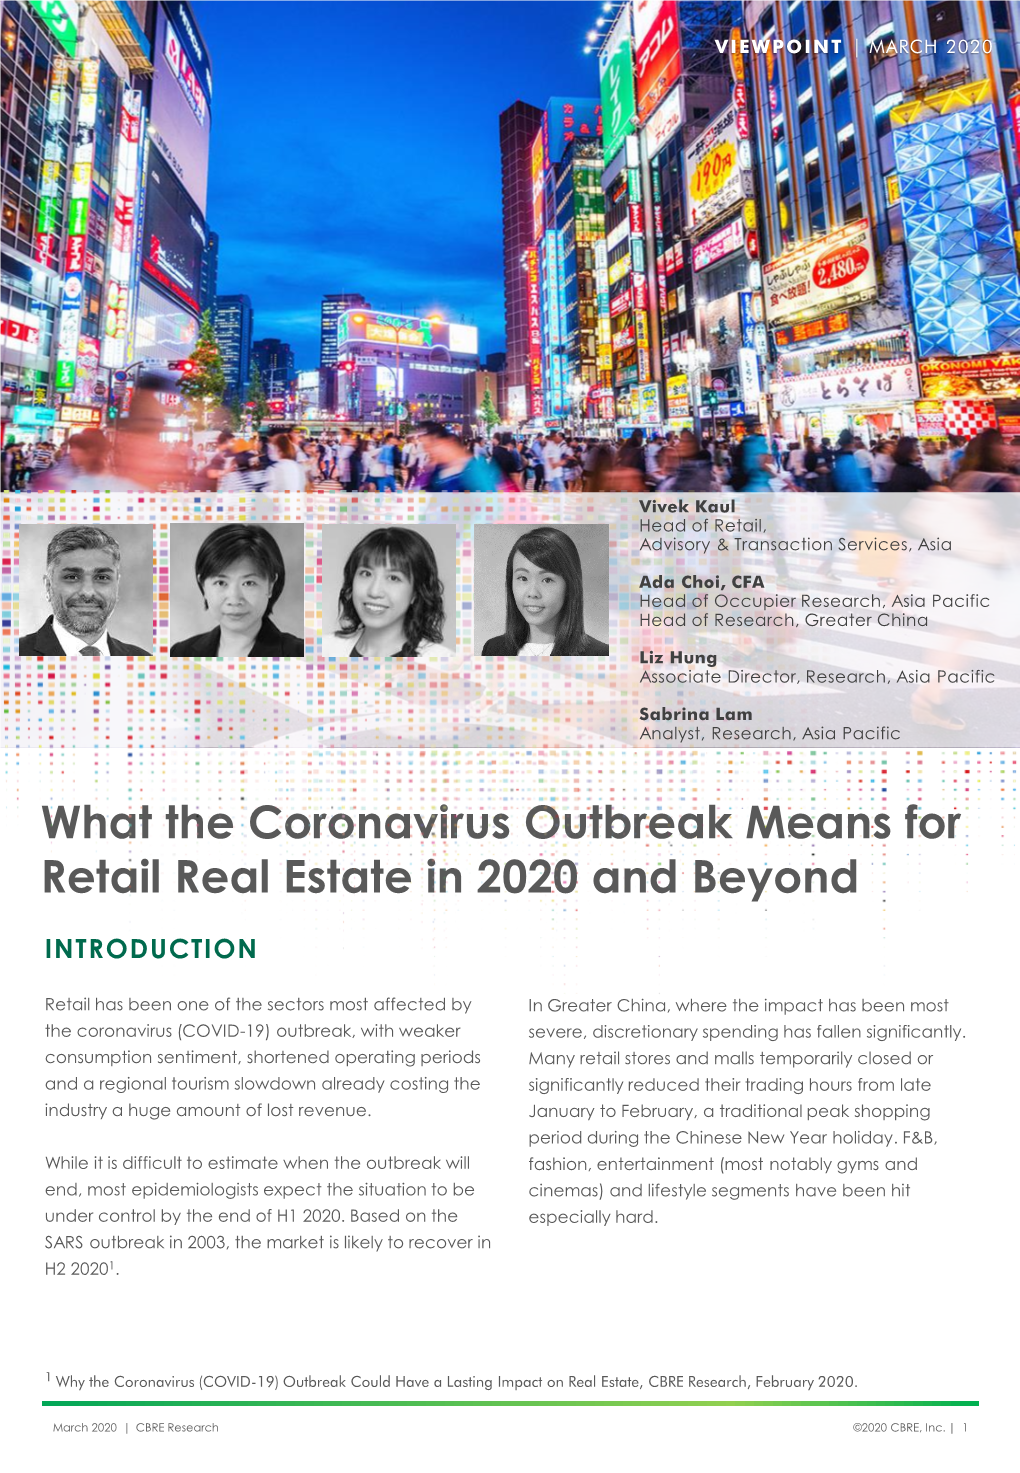 What the Coronavirus Outbreak Means for Retail Real Estate in 2020 and Beyond